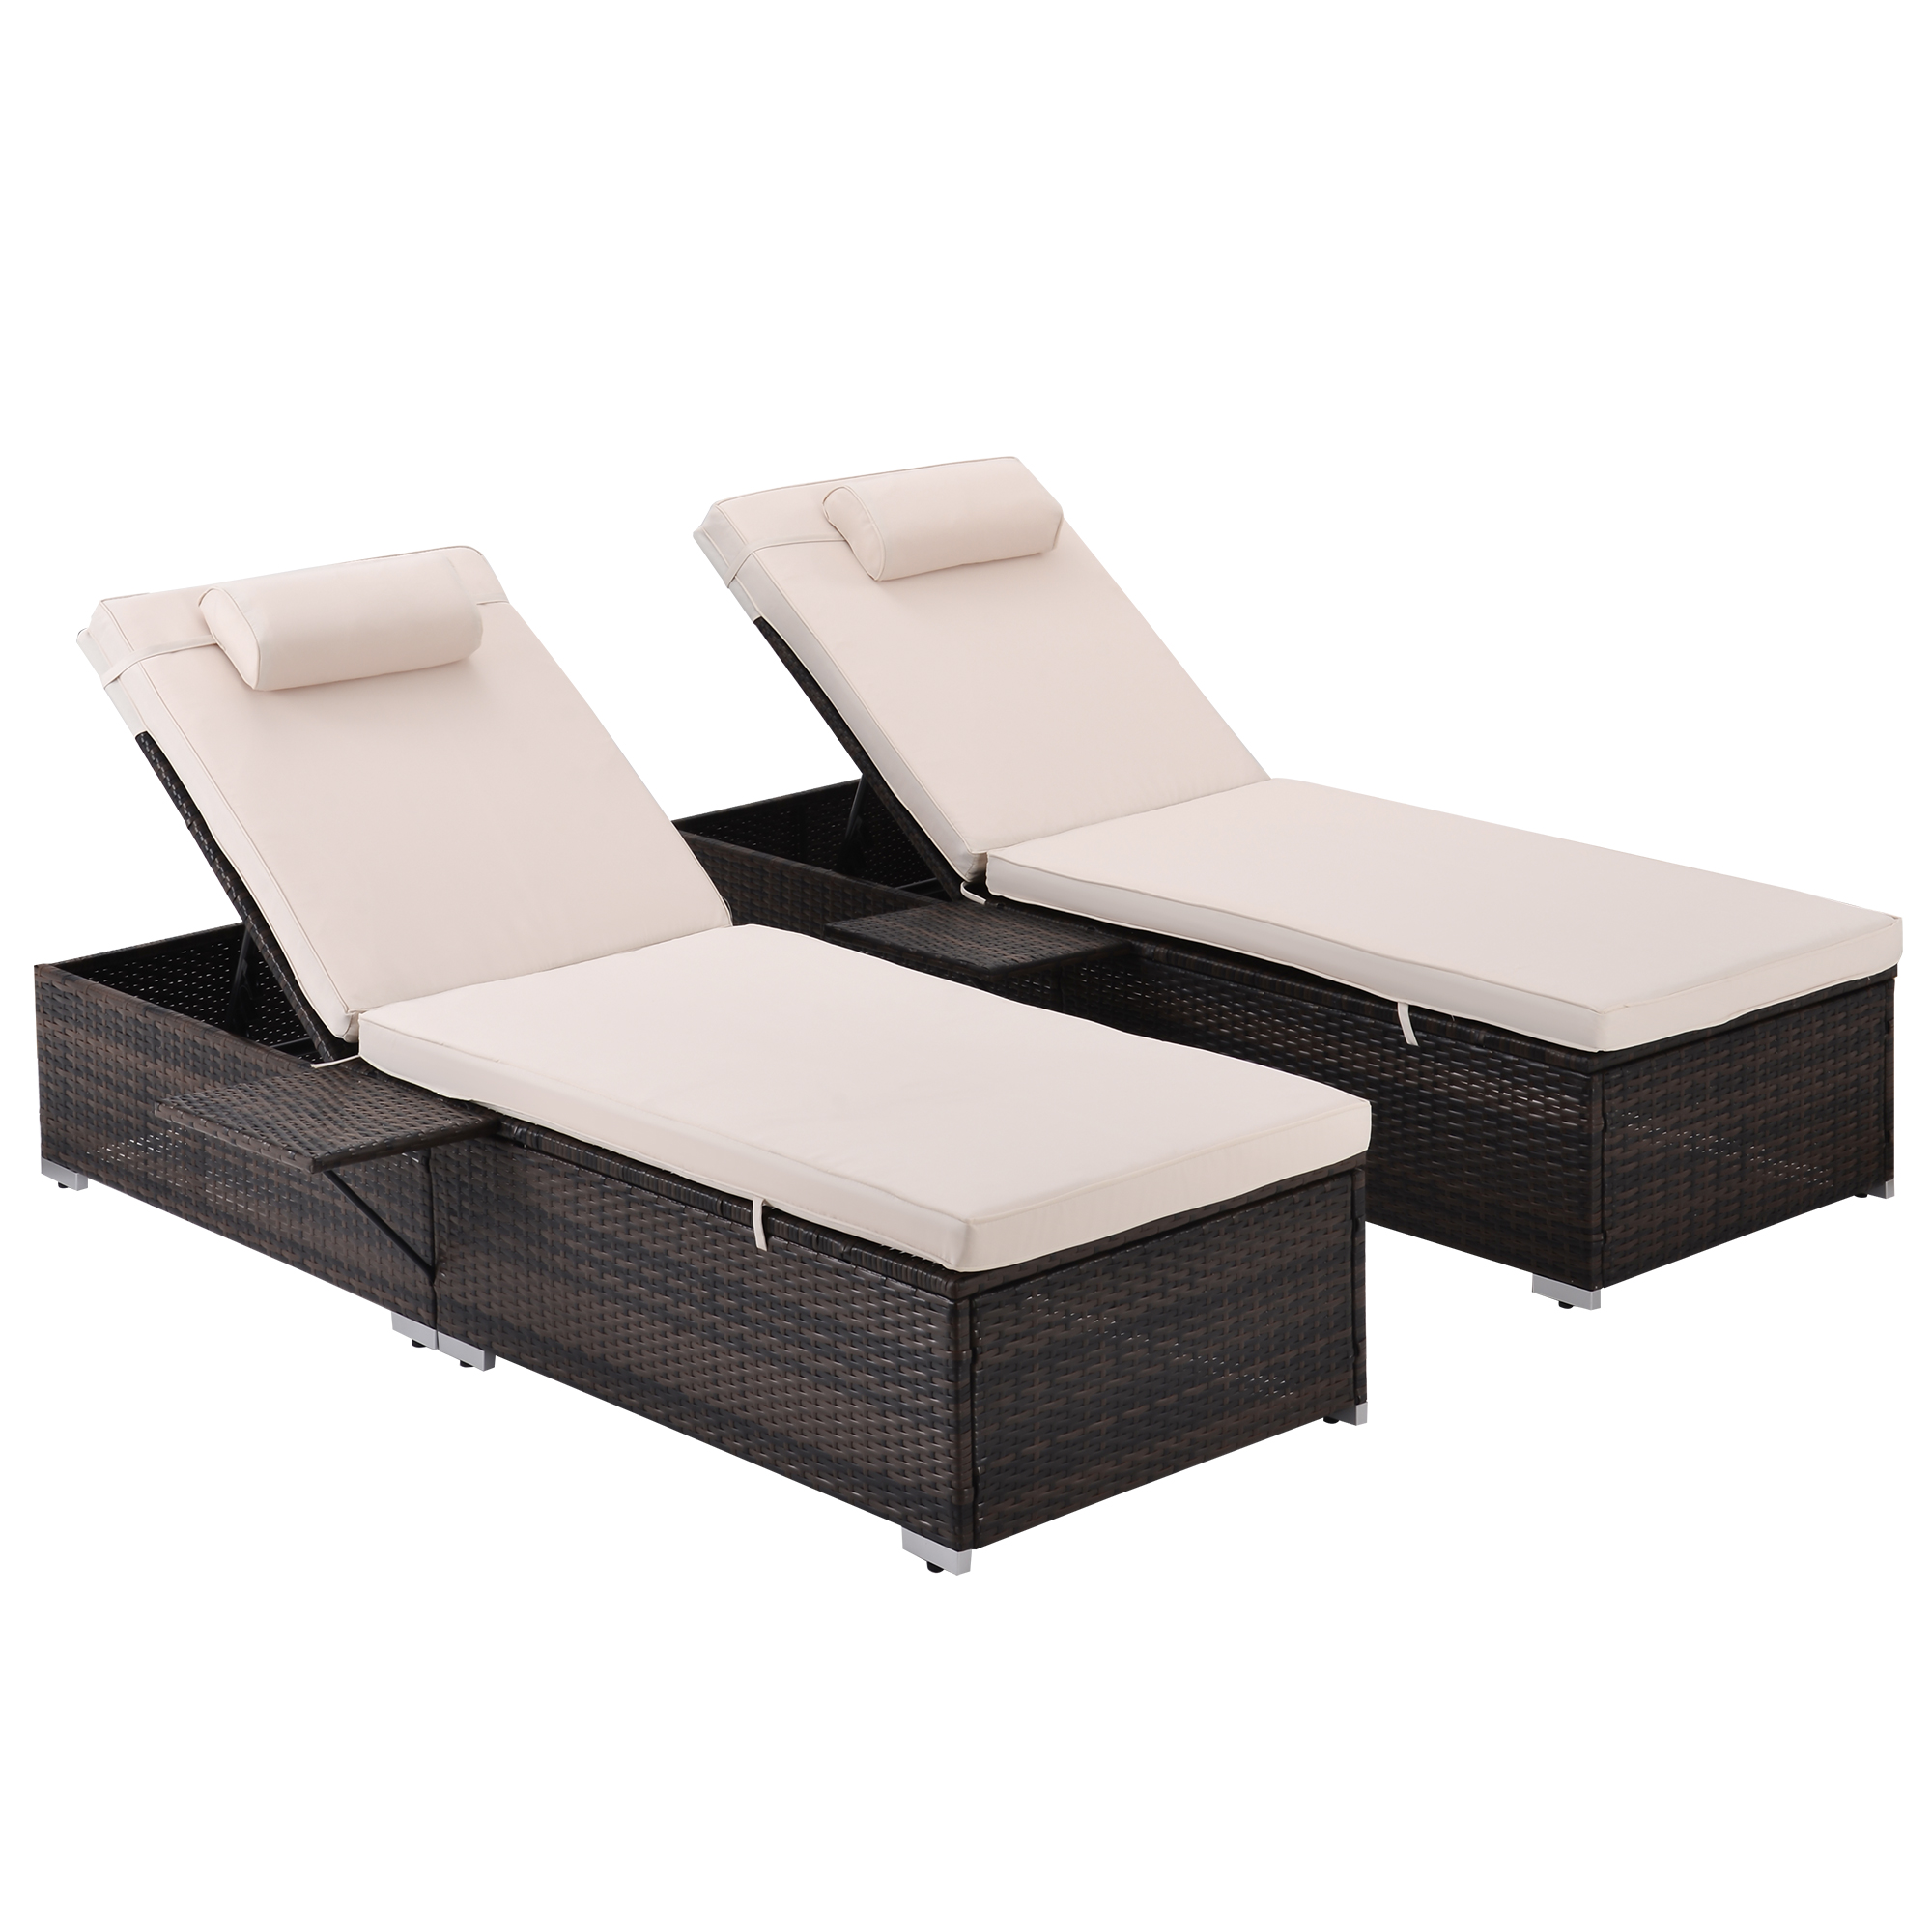 2 Piece Outdoor Patio Chaise Lounge, PE Wicker Lounge Chairs with Adjustable Backrest Recliners and Side Table, Reclining Chair Furniture Set with Cushions for Poolside Deck Patio Garden, K2686 - image 3 of 10